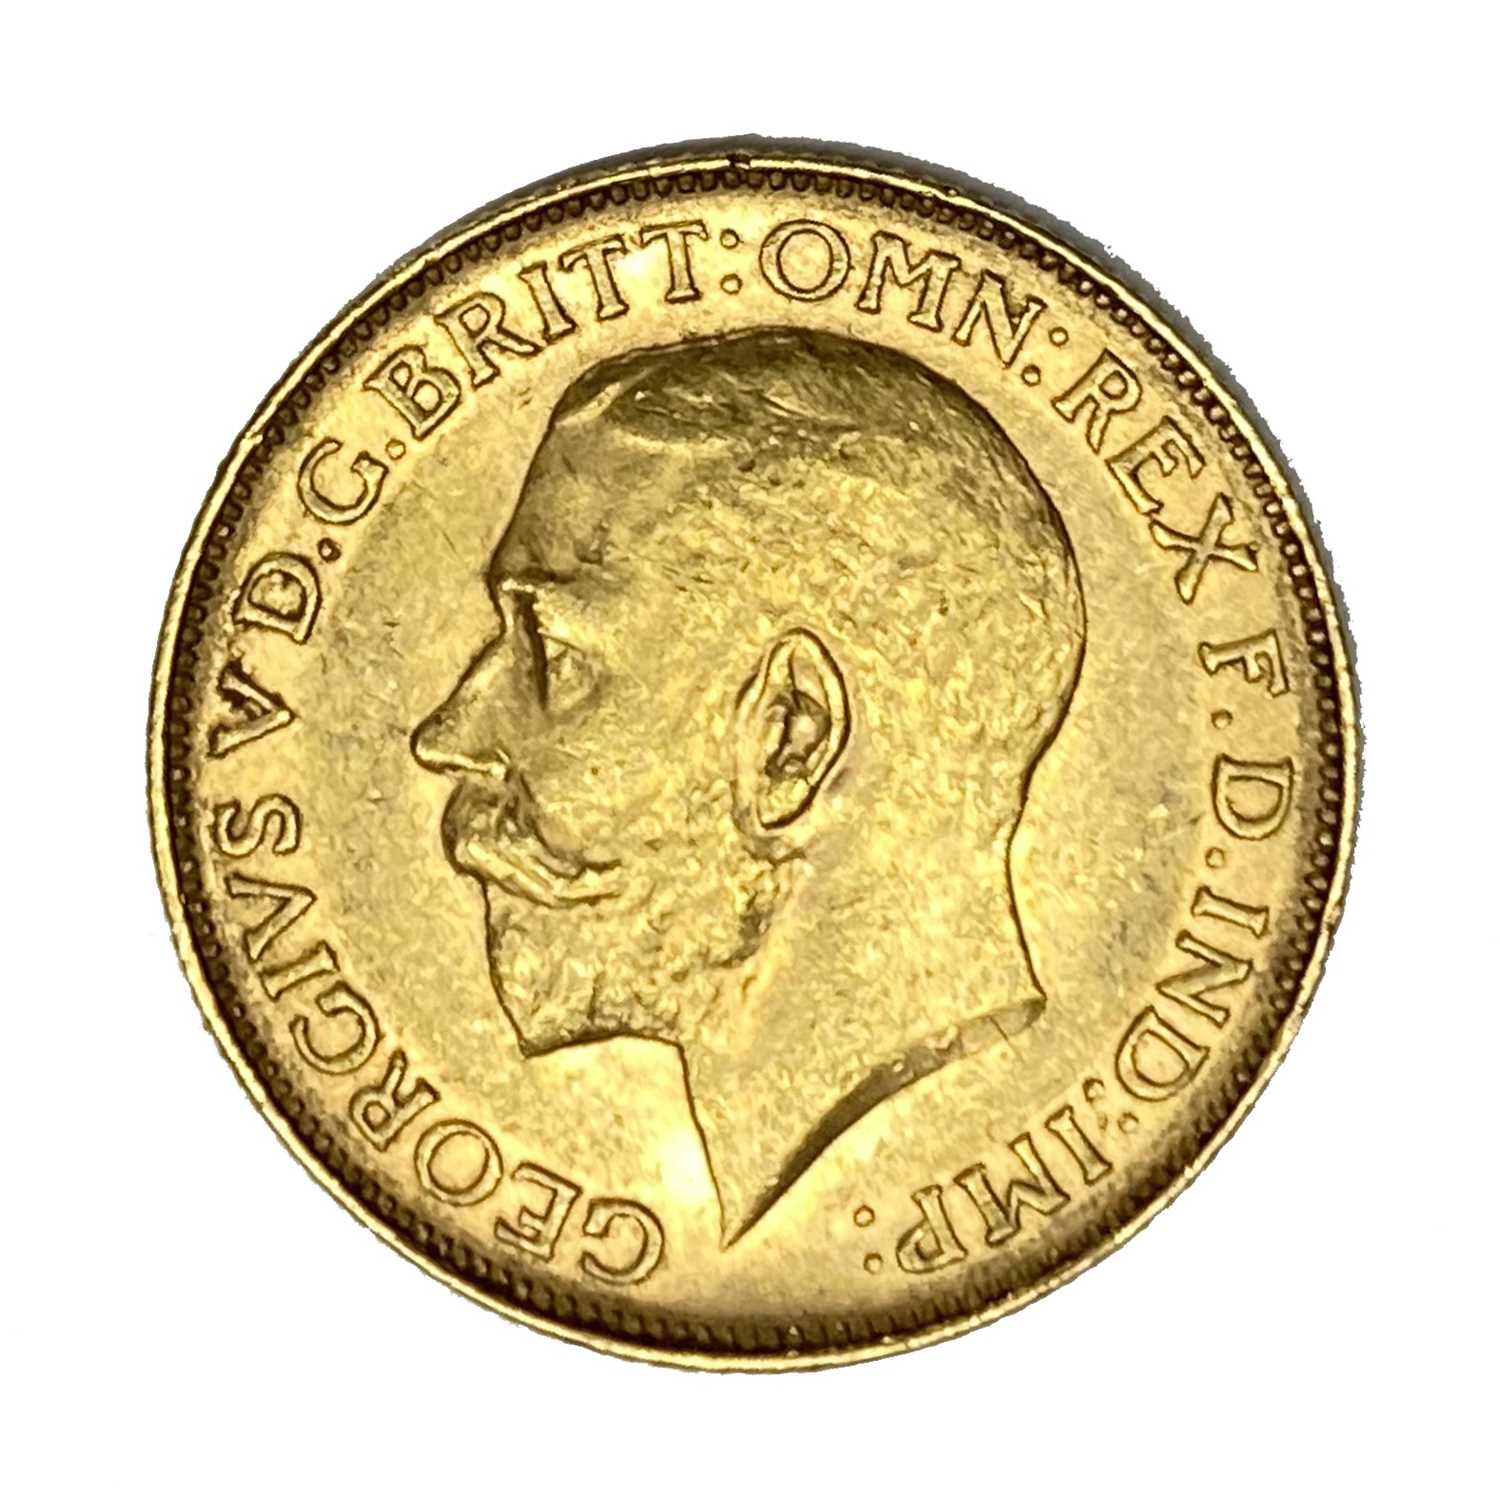 Lot 39 - George V gold Sovereign coin, 1911, Perth mint